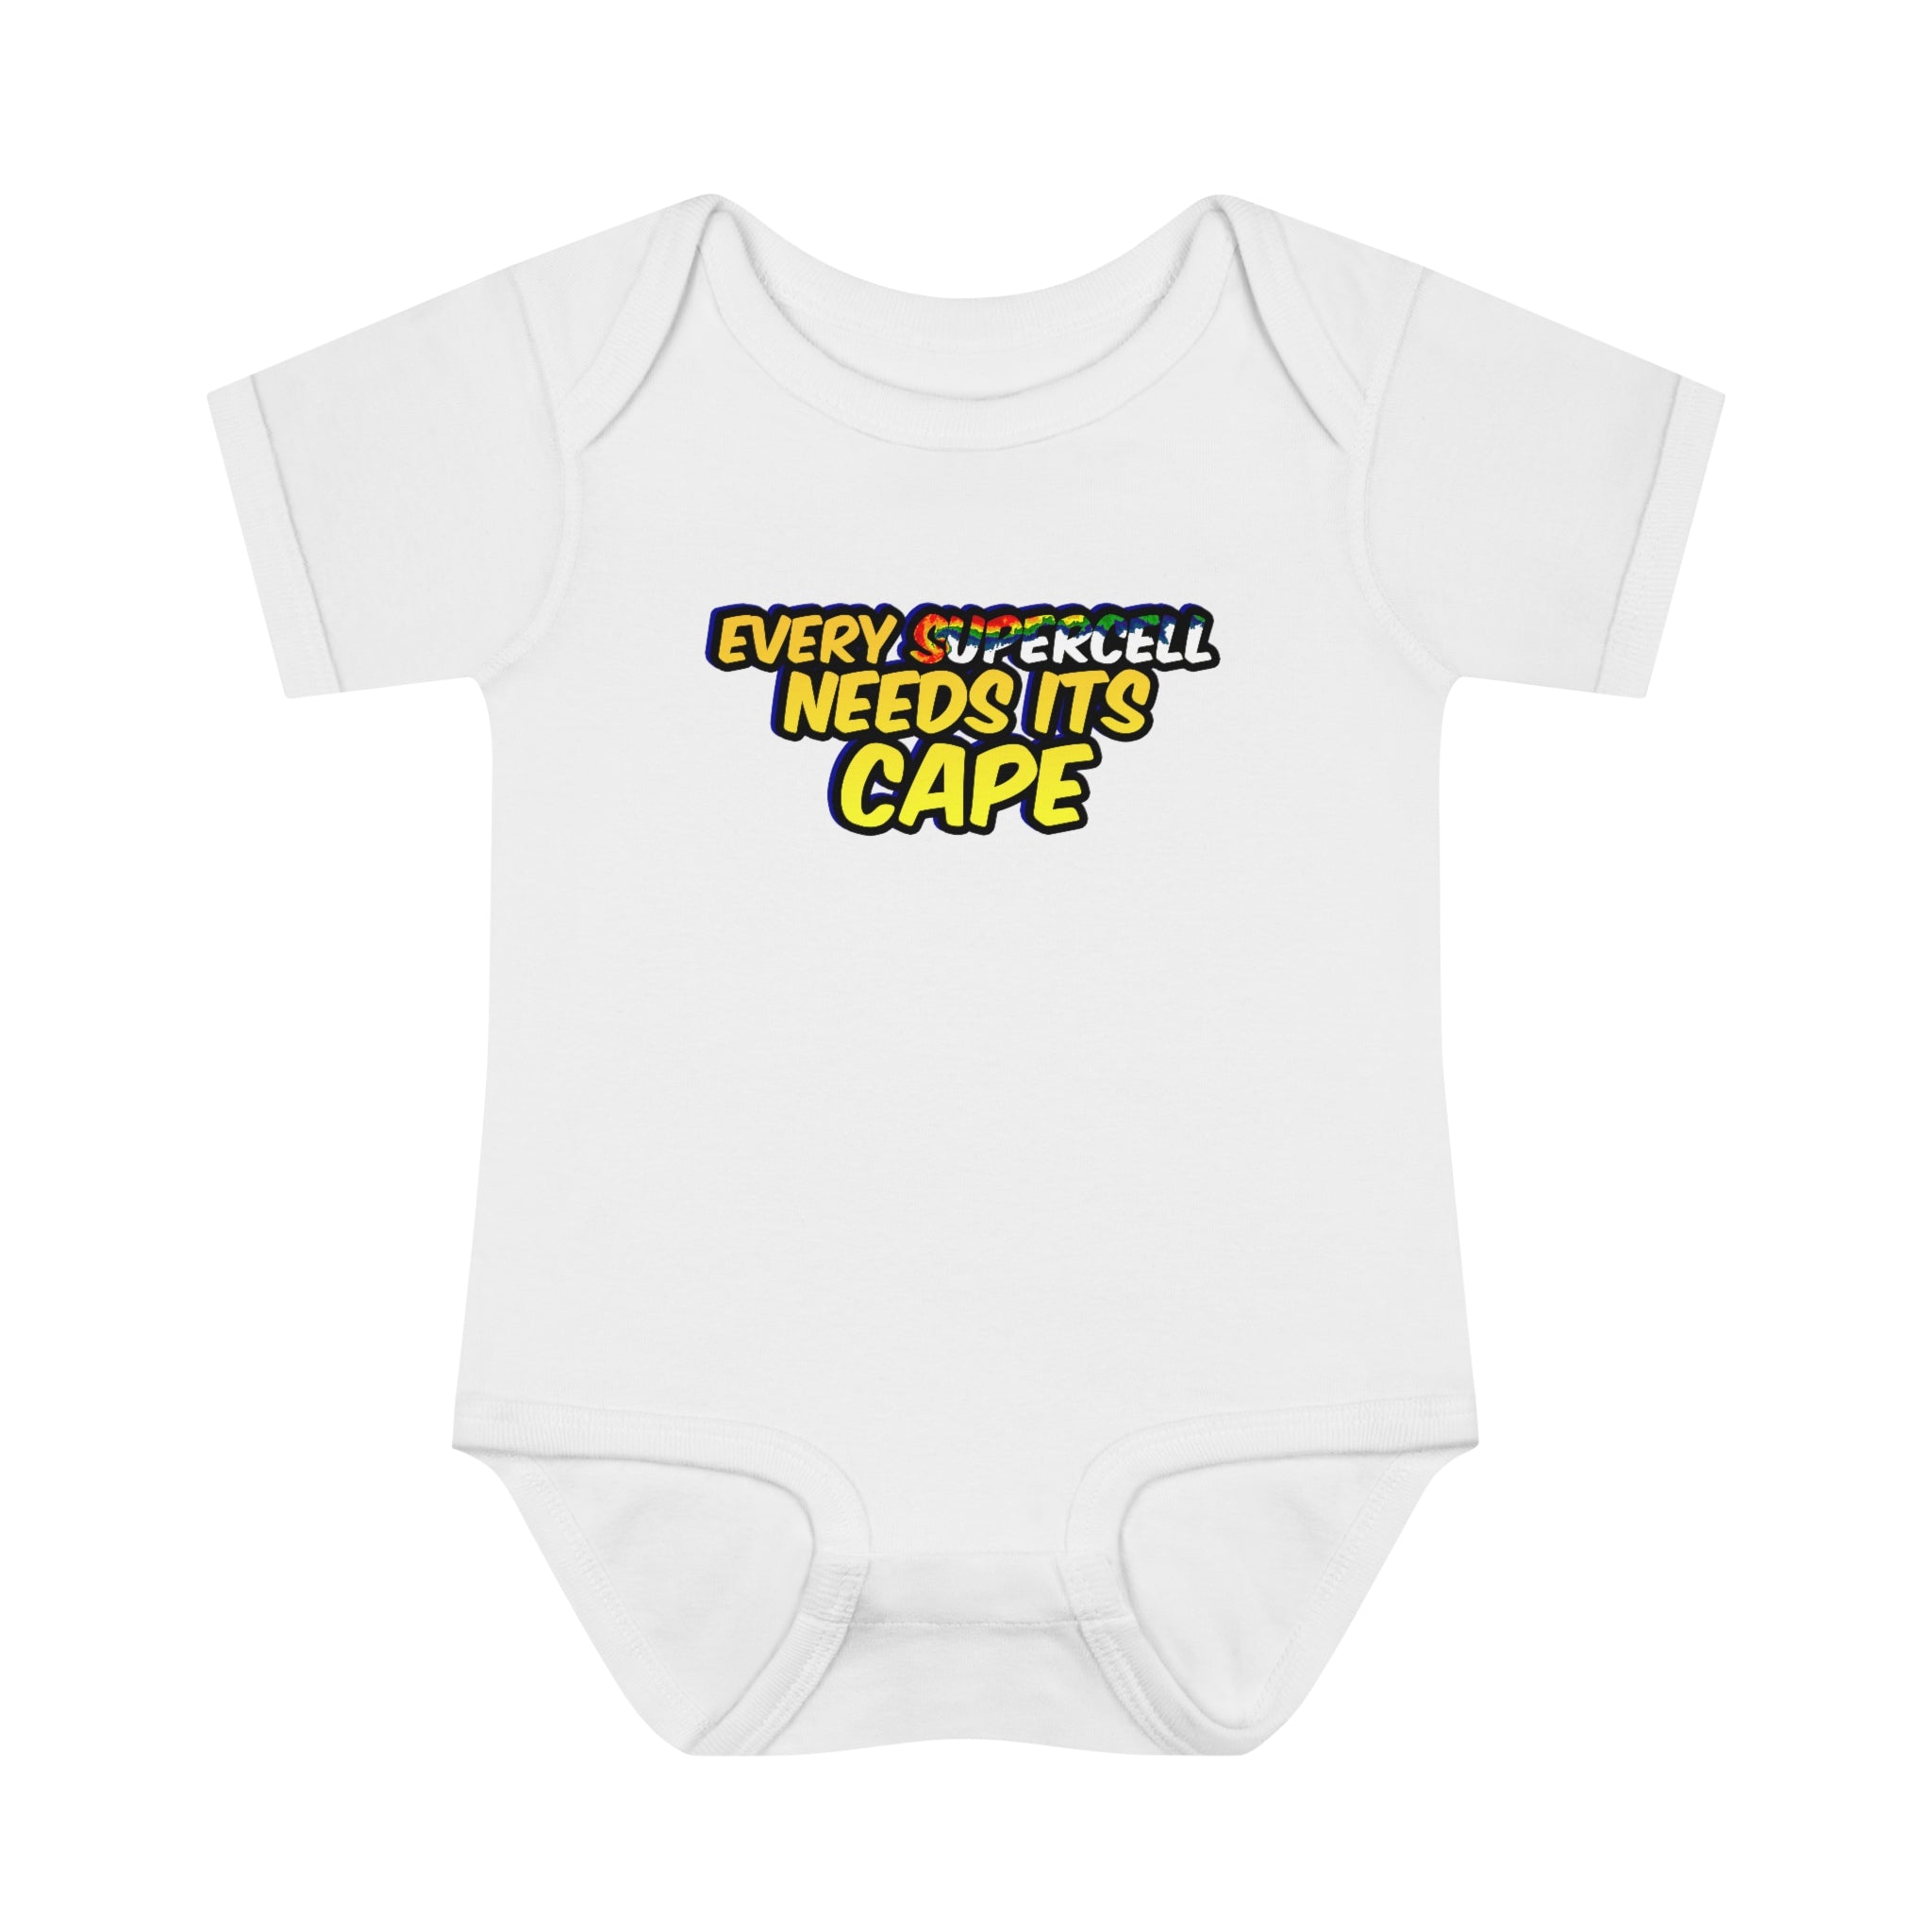 Every Supercell Needs Its CAPE Infant Bodysuit 